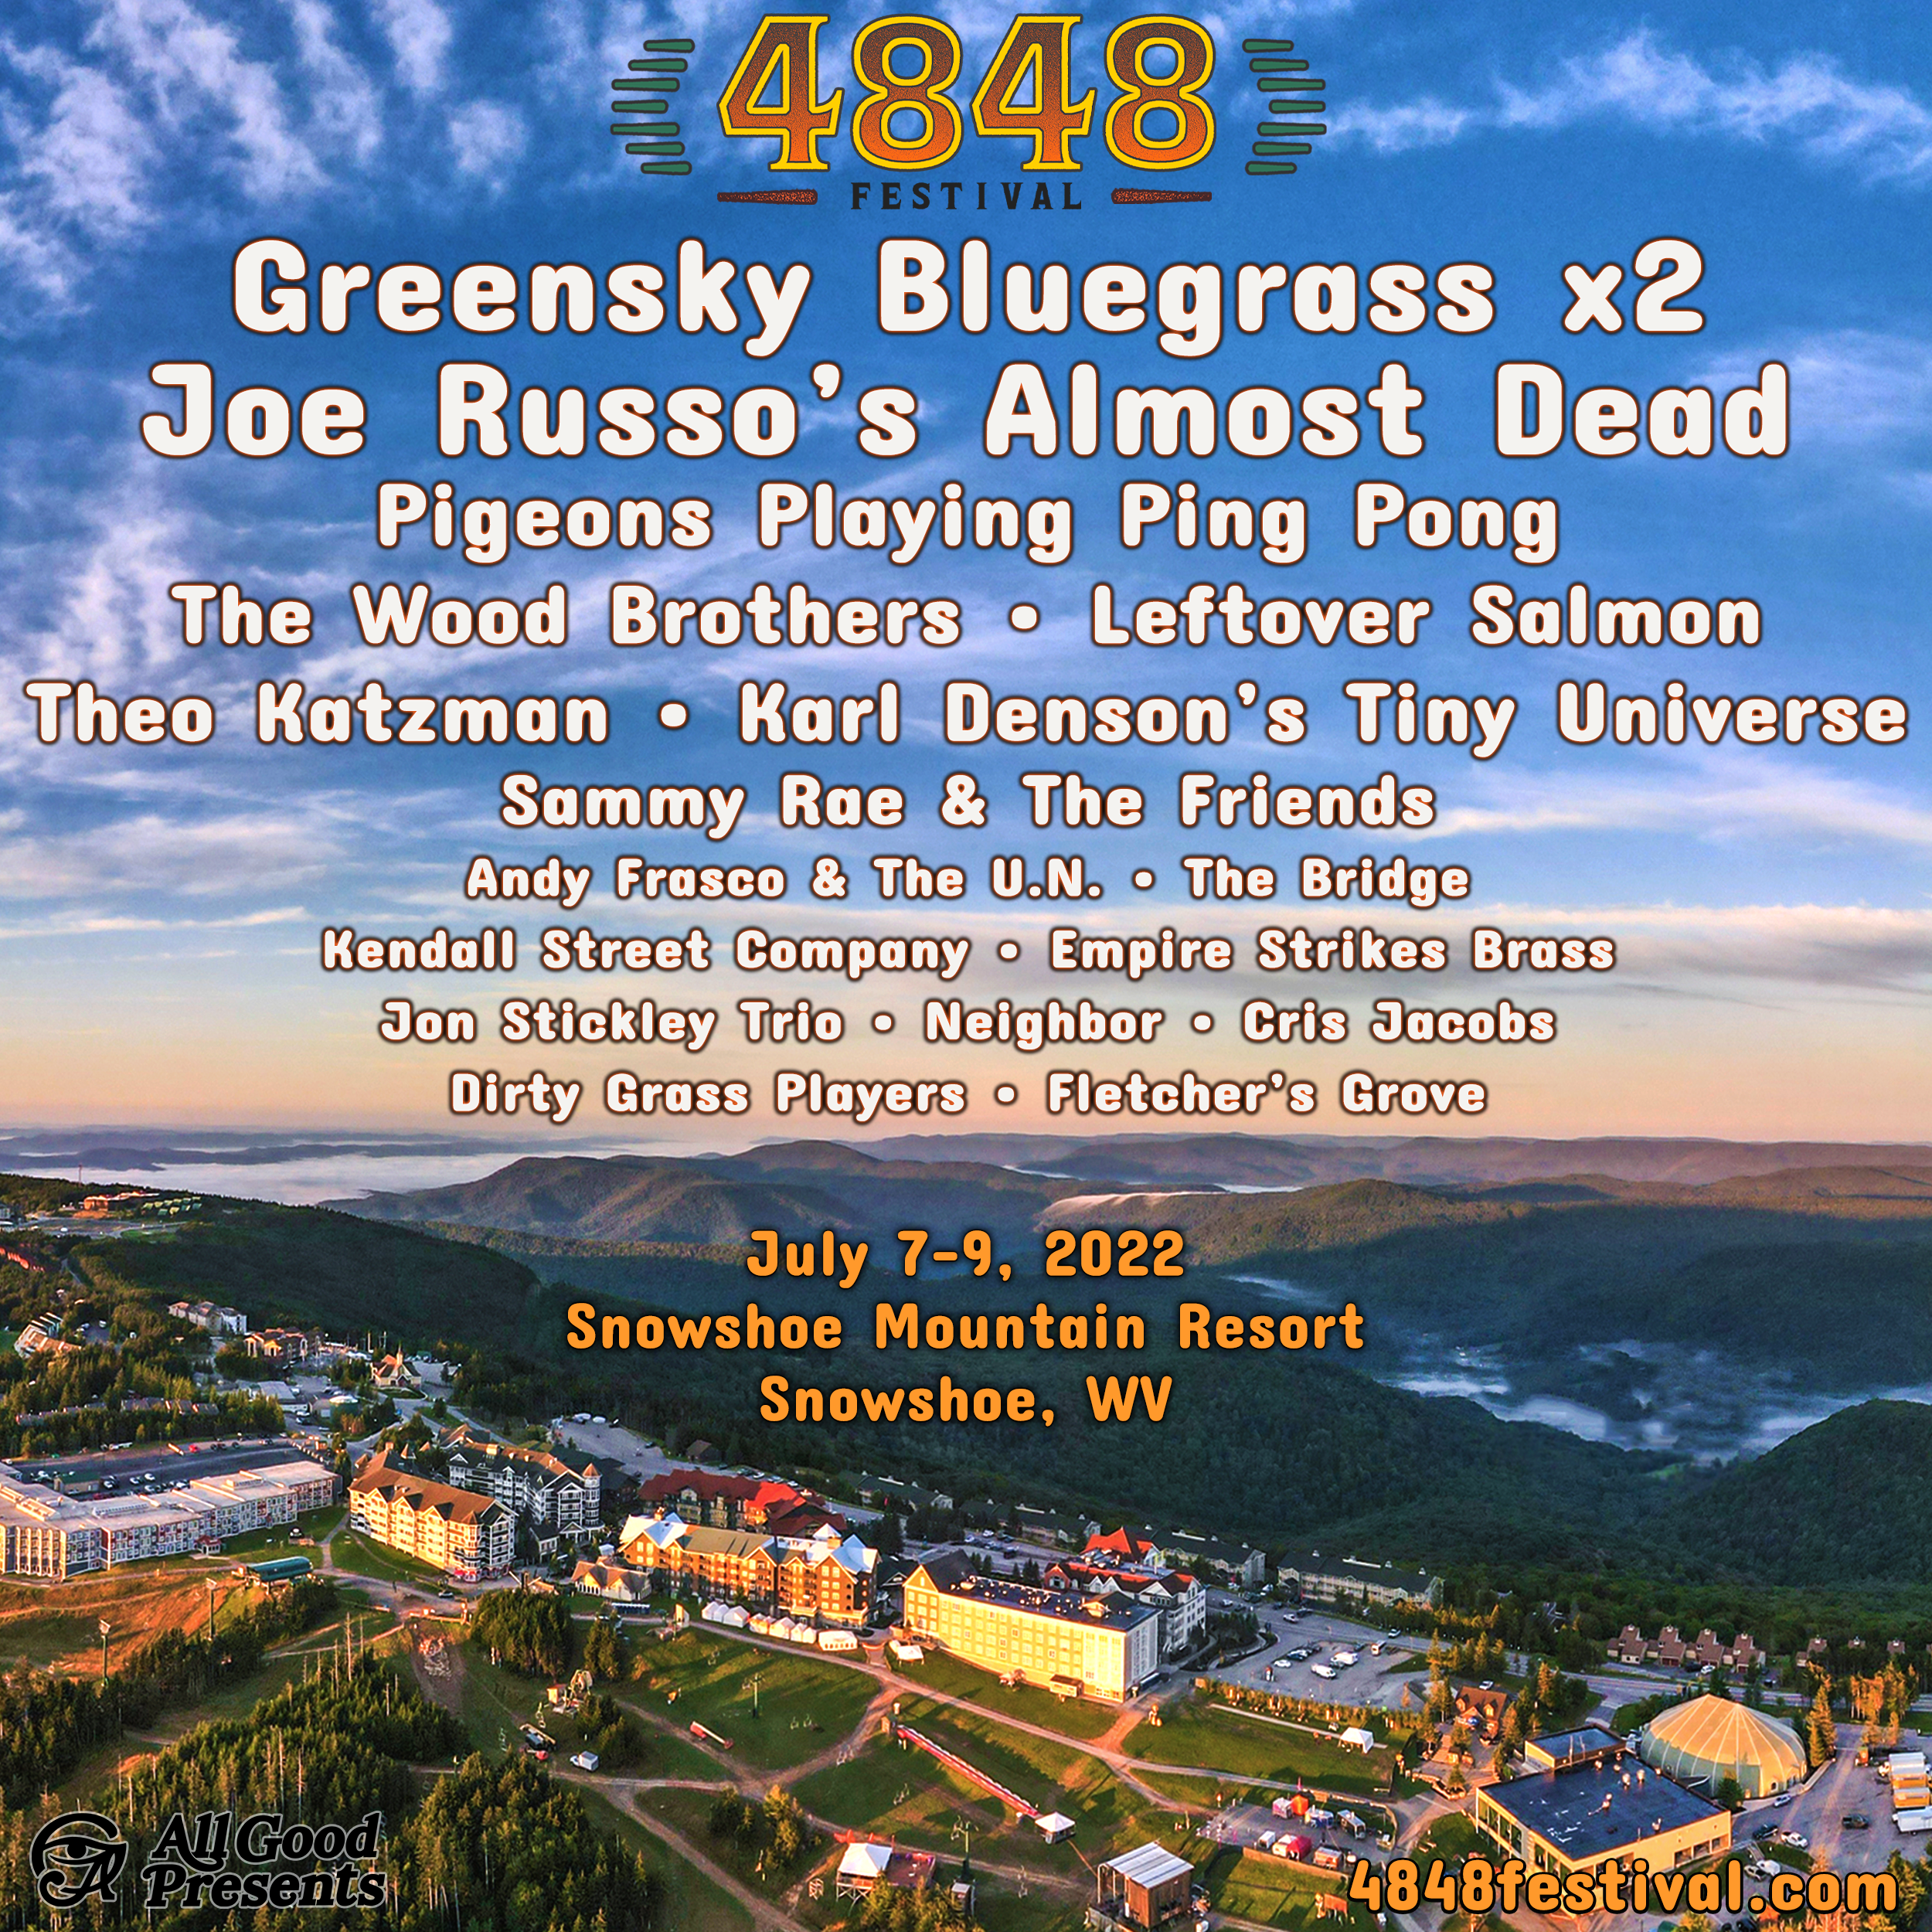 4848 Festival Announces Lineup for July 7 – 9 Event at Snowshoe Mountain